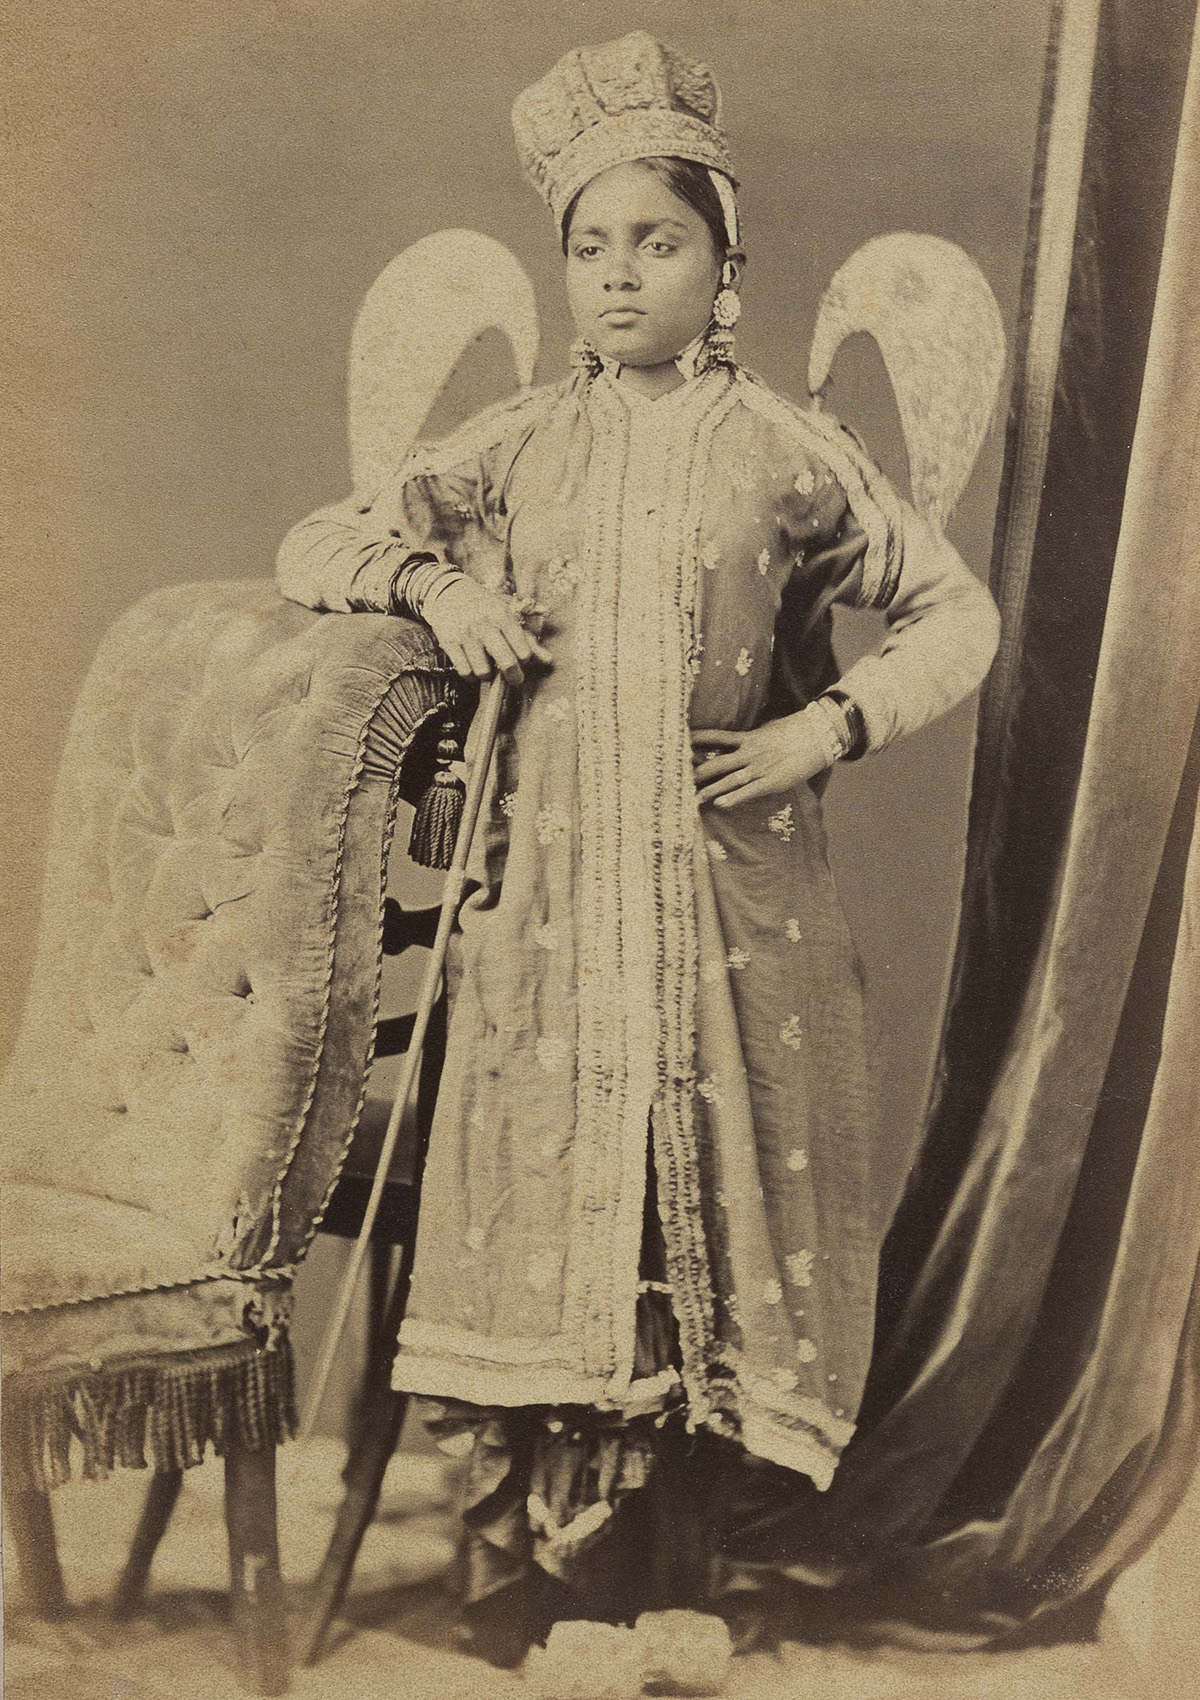 A sepia-toned photograph of a woman dressed as a winged fairy, standing upright next to a chair.